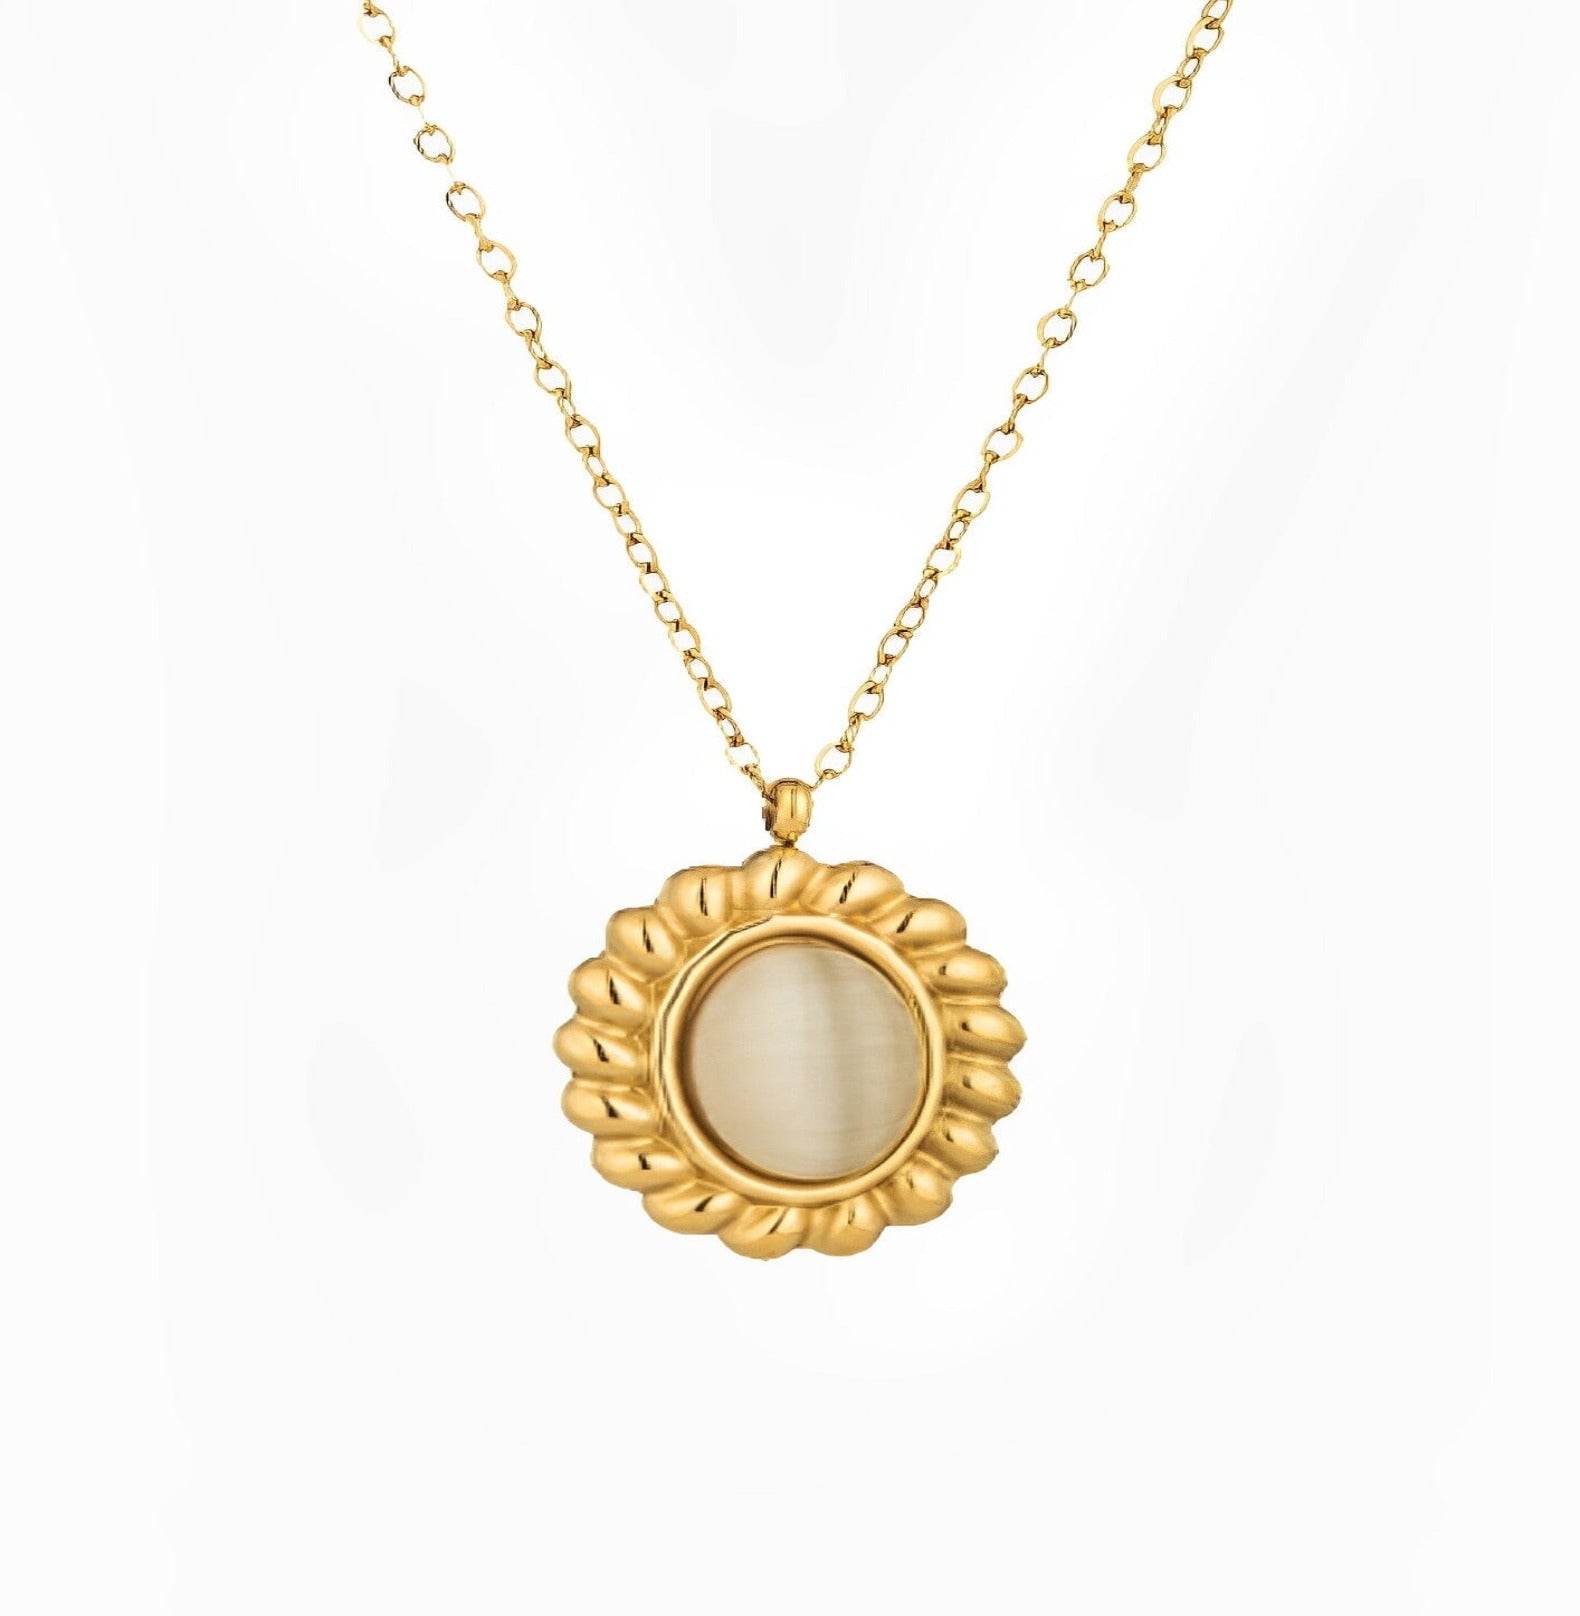 SUN OPAL NECKLACE neck Yubama Jewelry Online Store - The Elegant Designs of Gold and Silver ! 